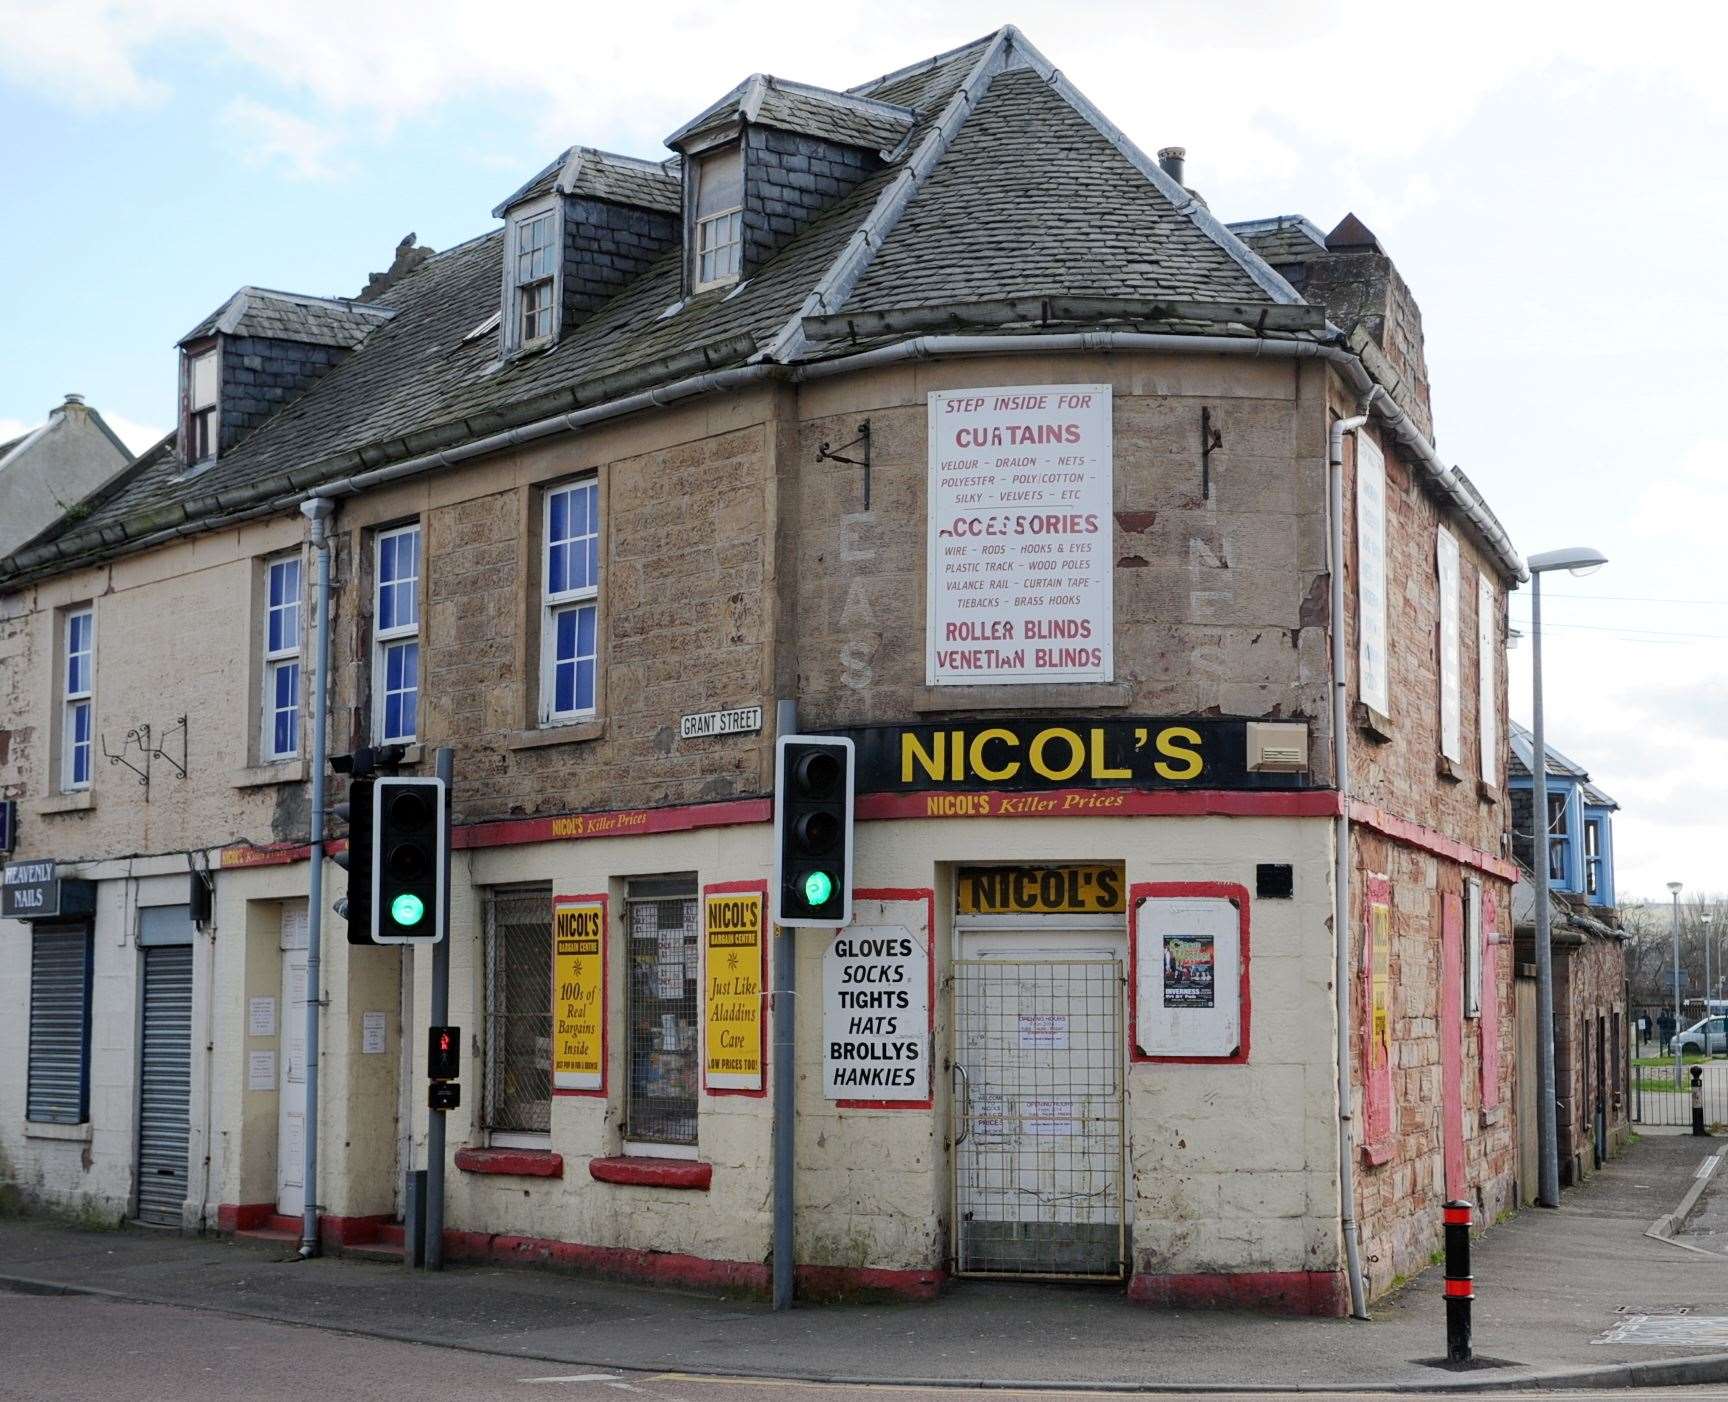 Nicol's in Grant Street was a favourite for many locals in years gone by.